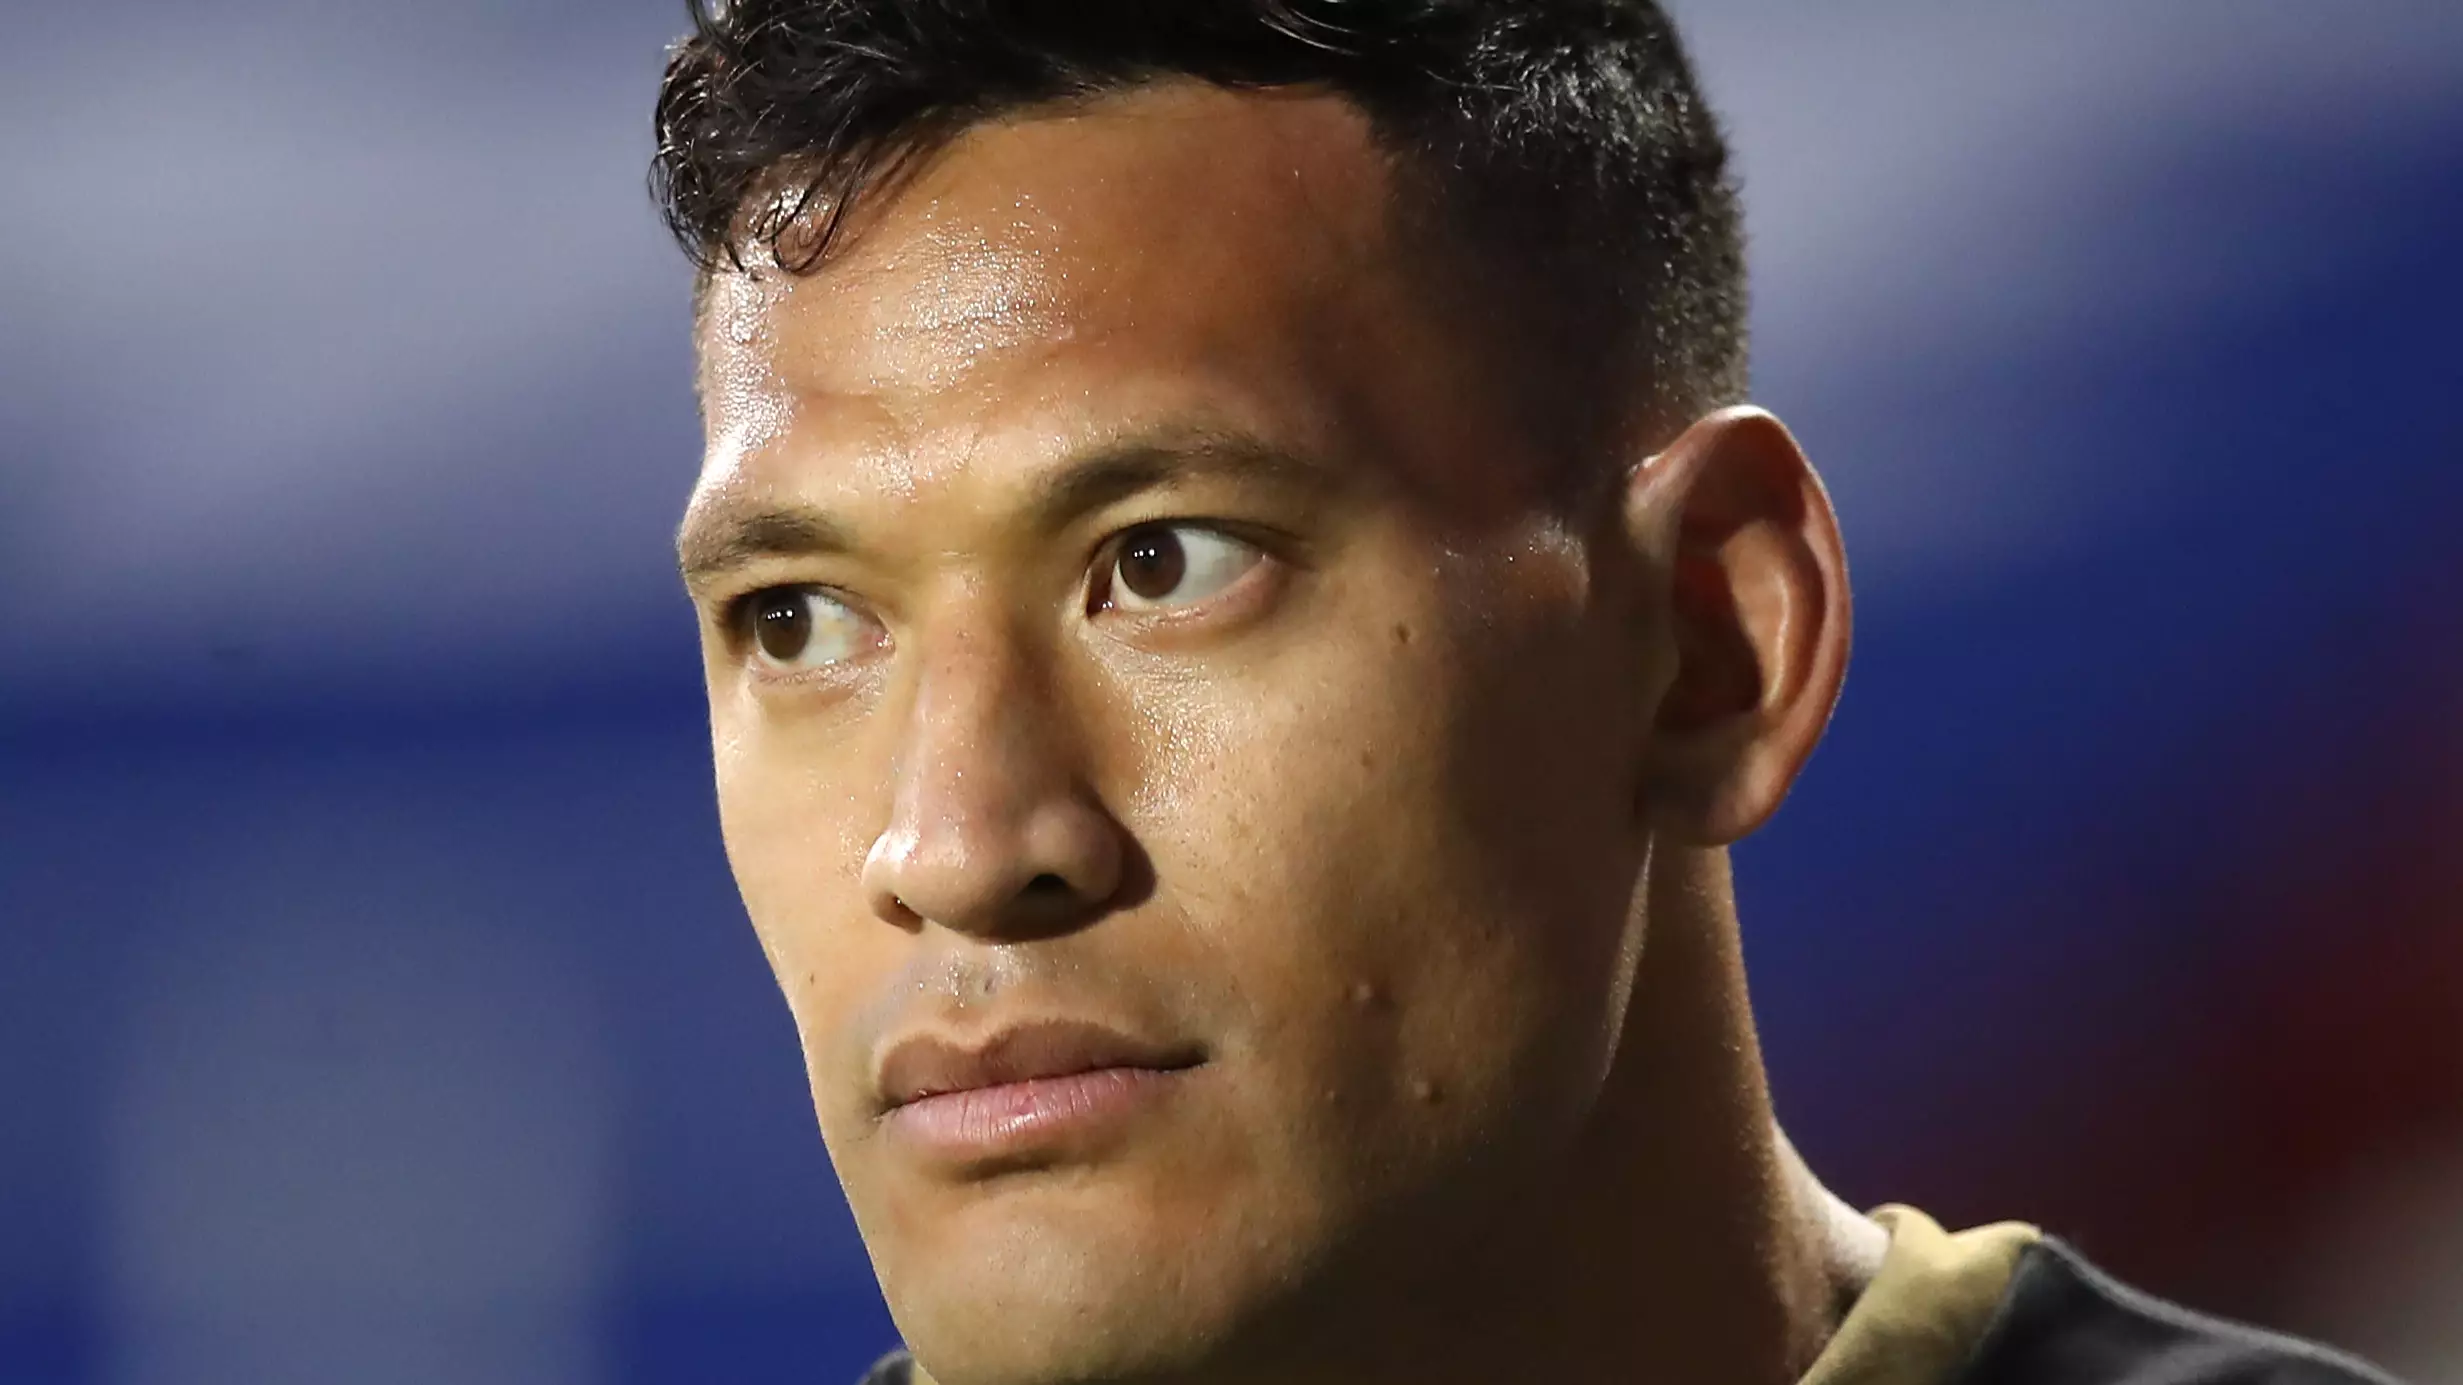 Thousands Sign Petition For Israel Folau To Be Allowed To Play Sport In Australia